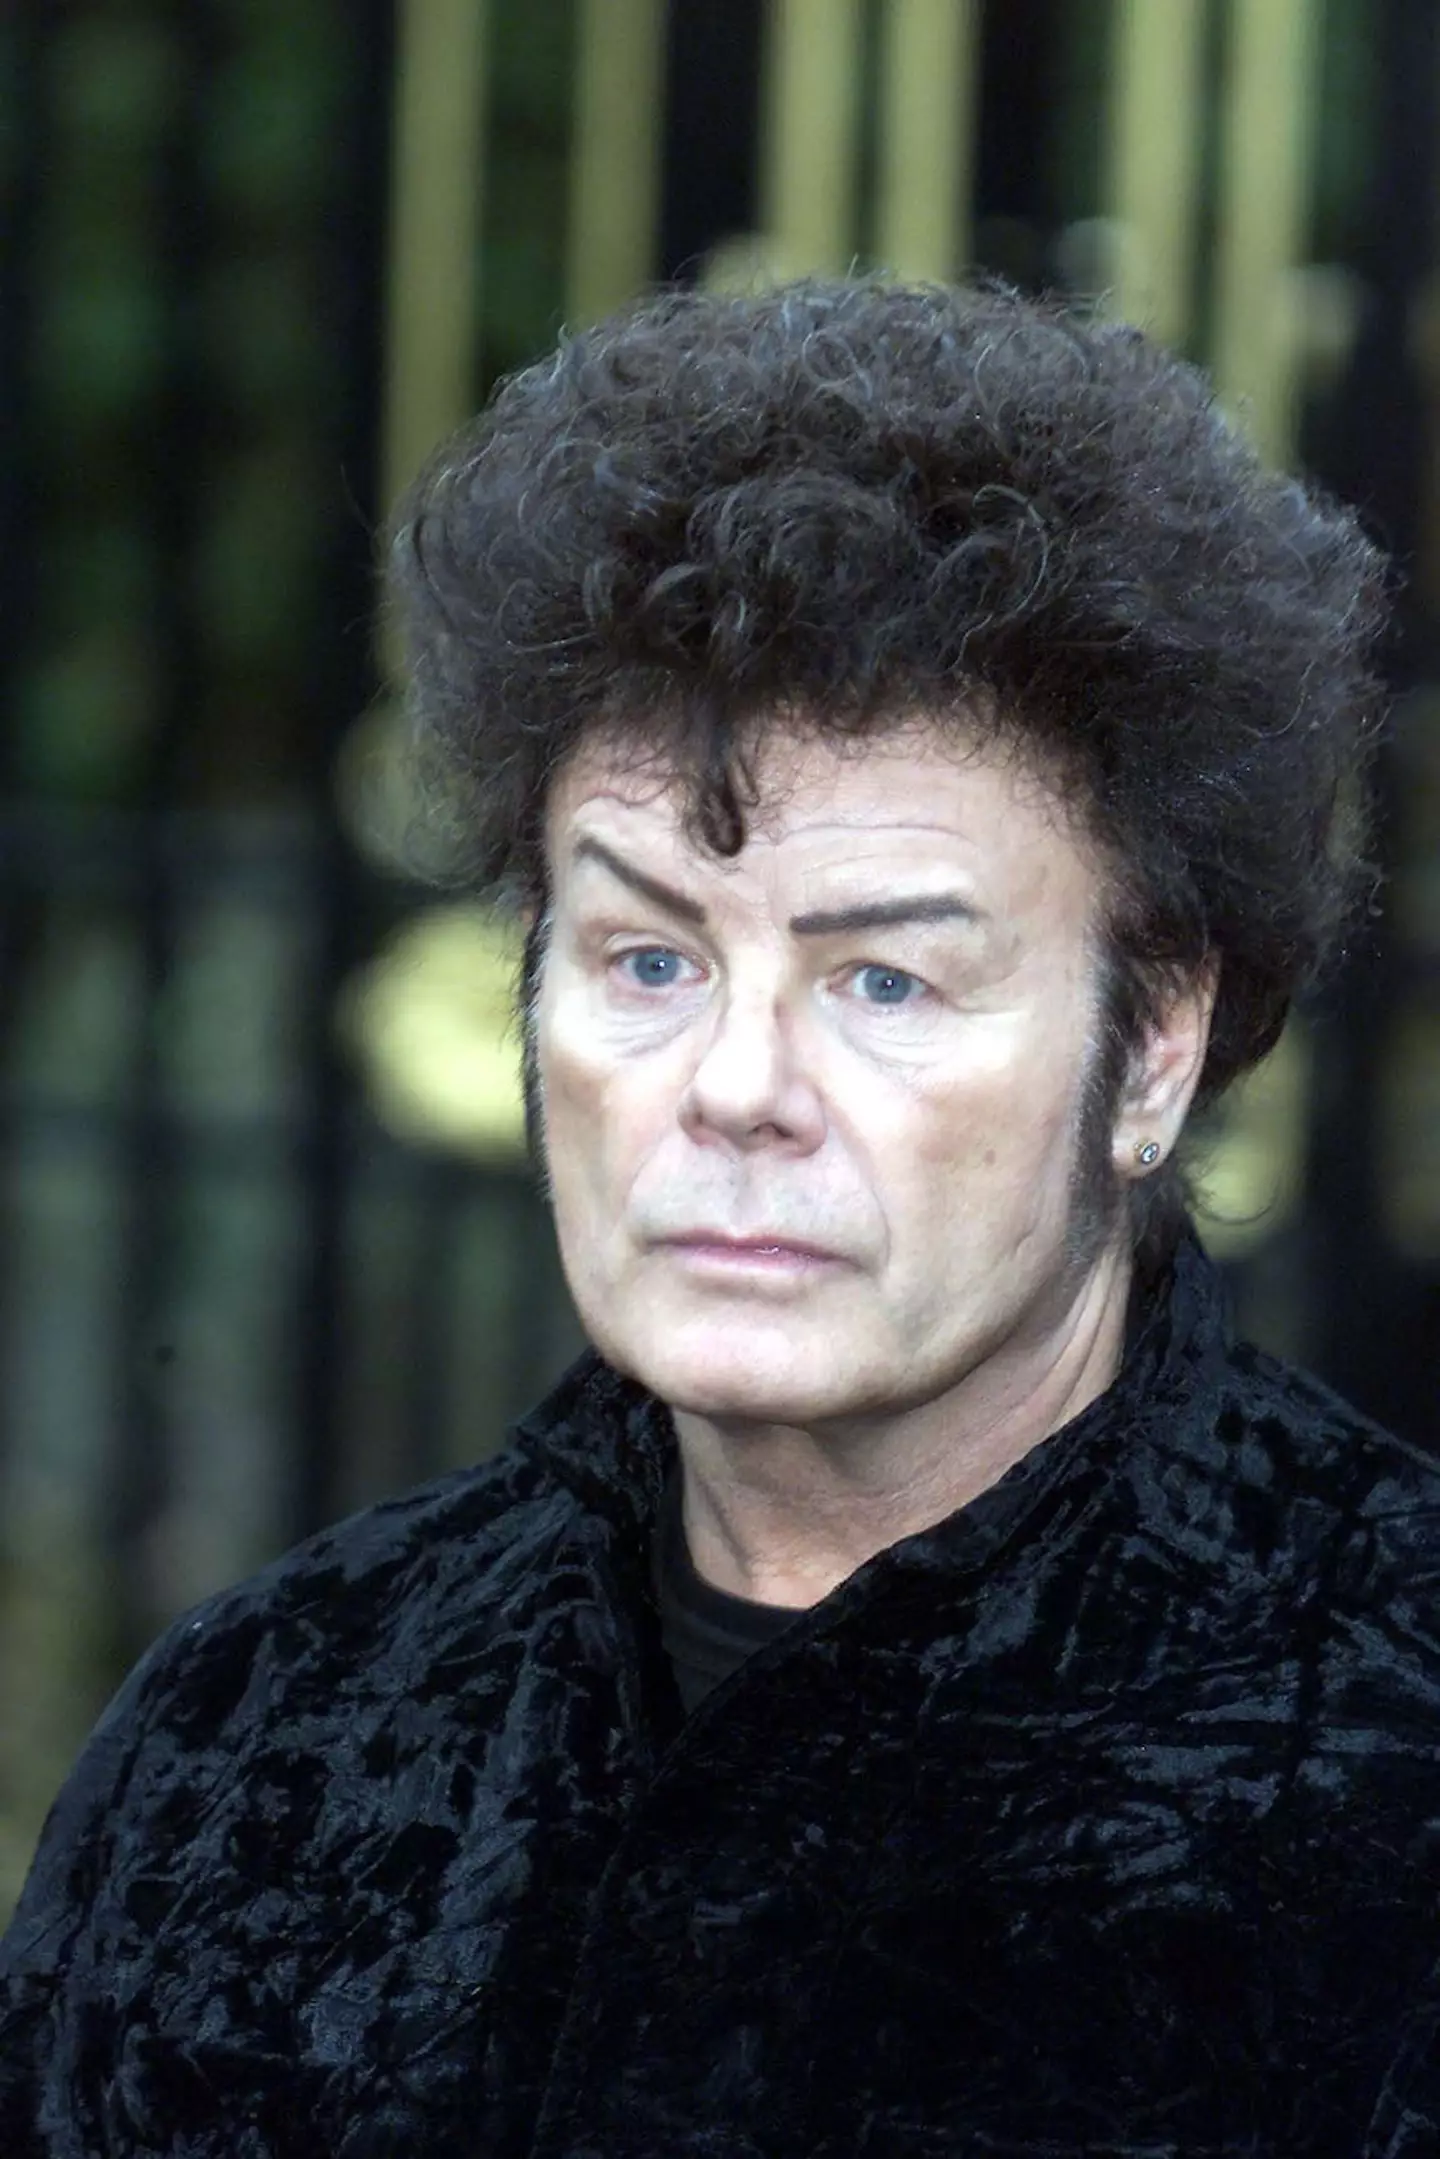 Gary Glitter pictured in January 2000.